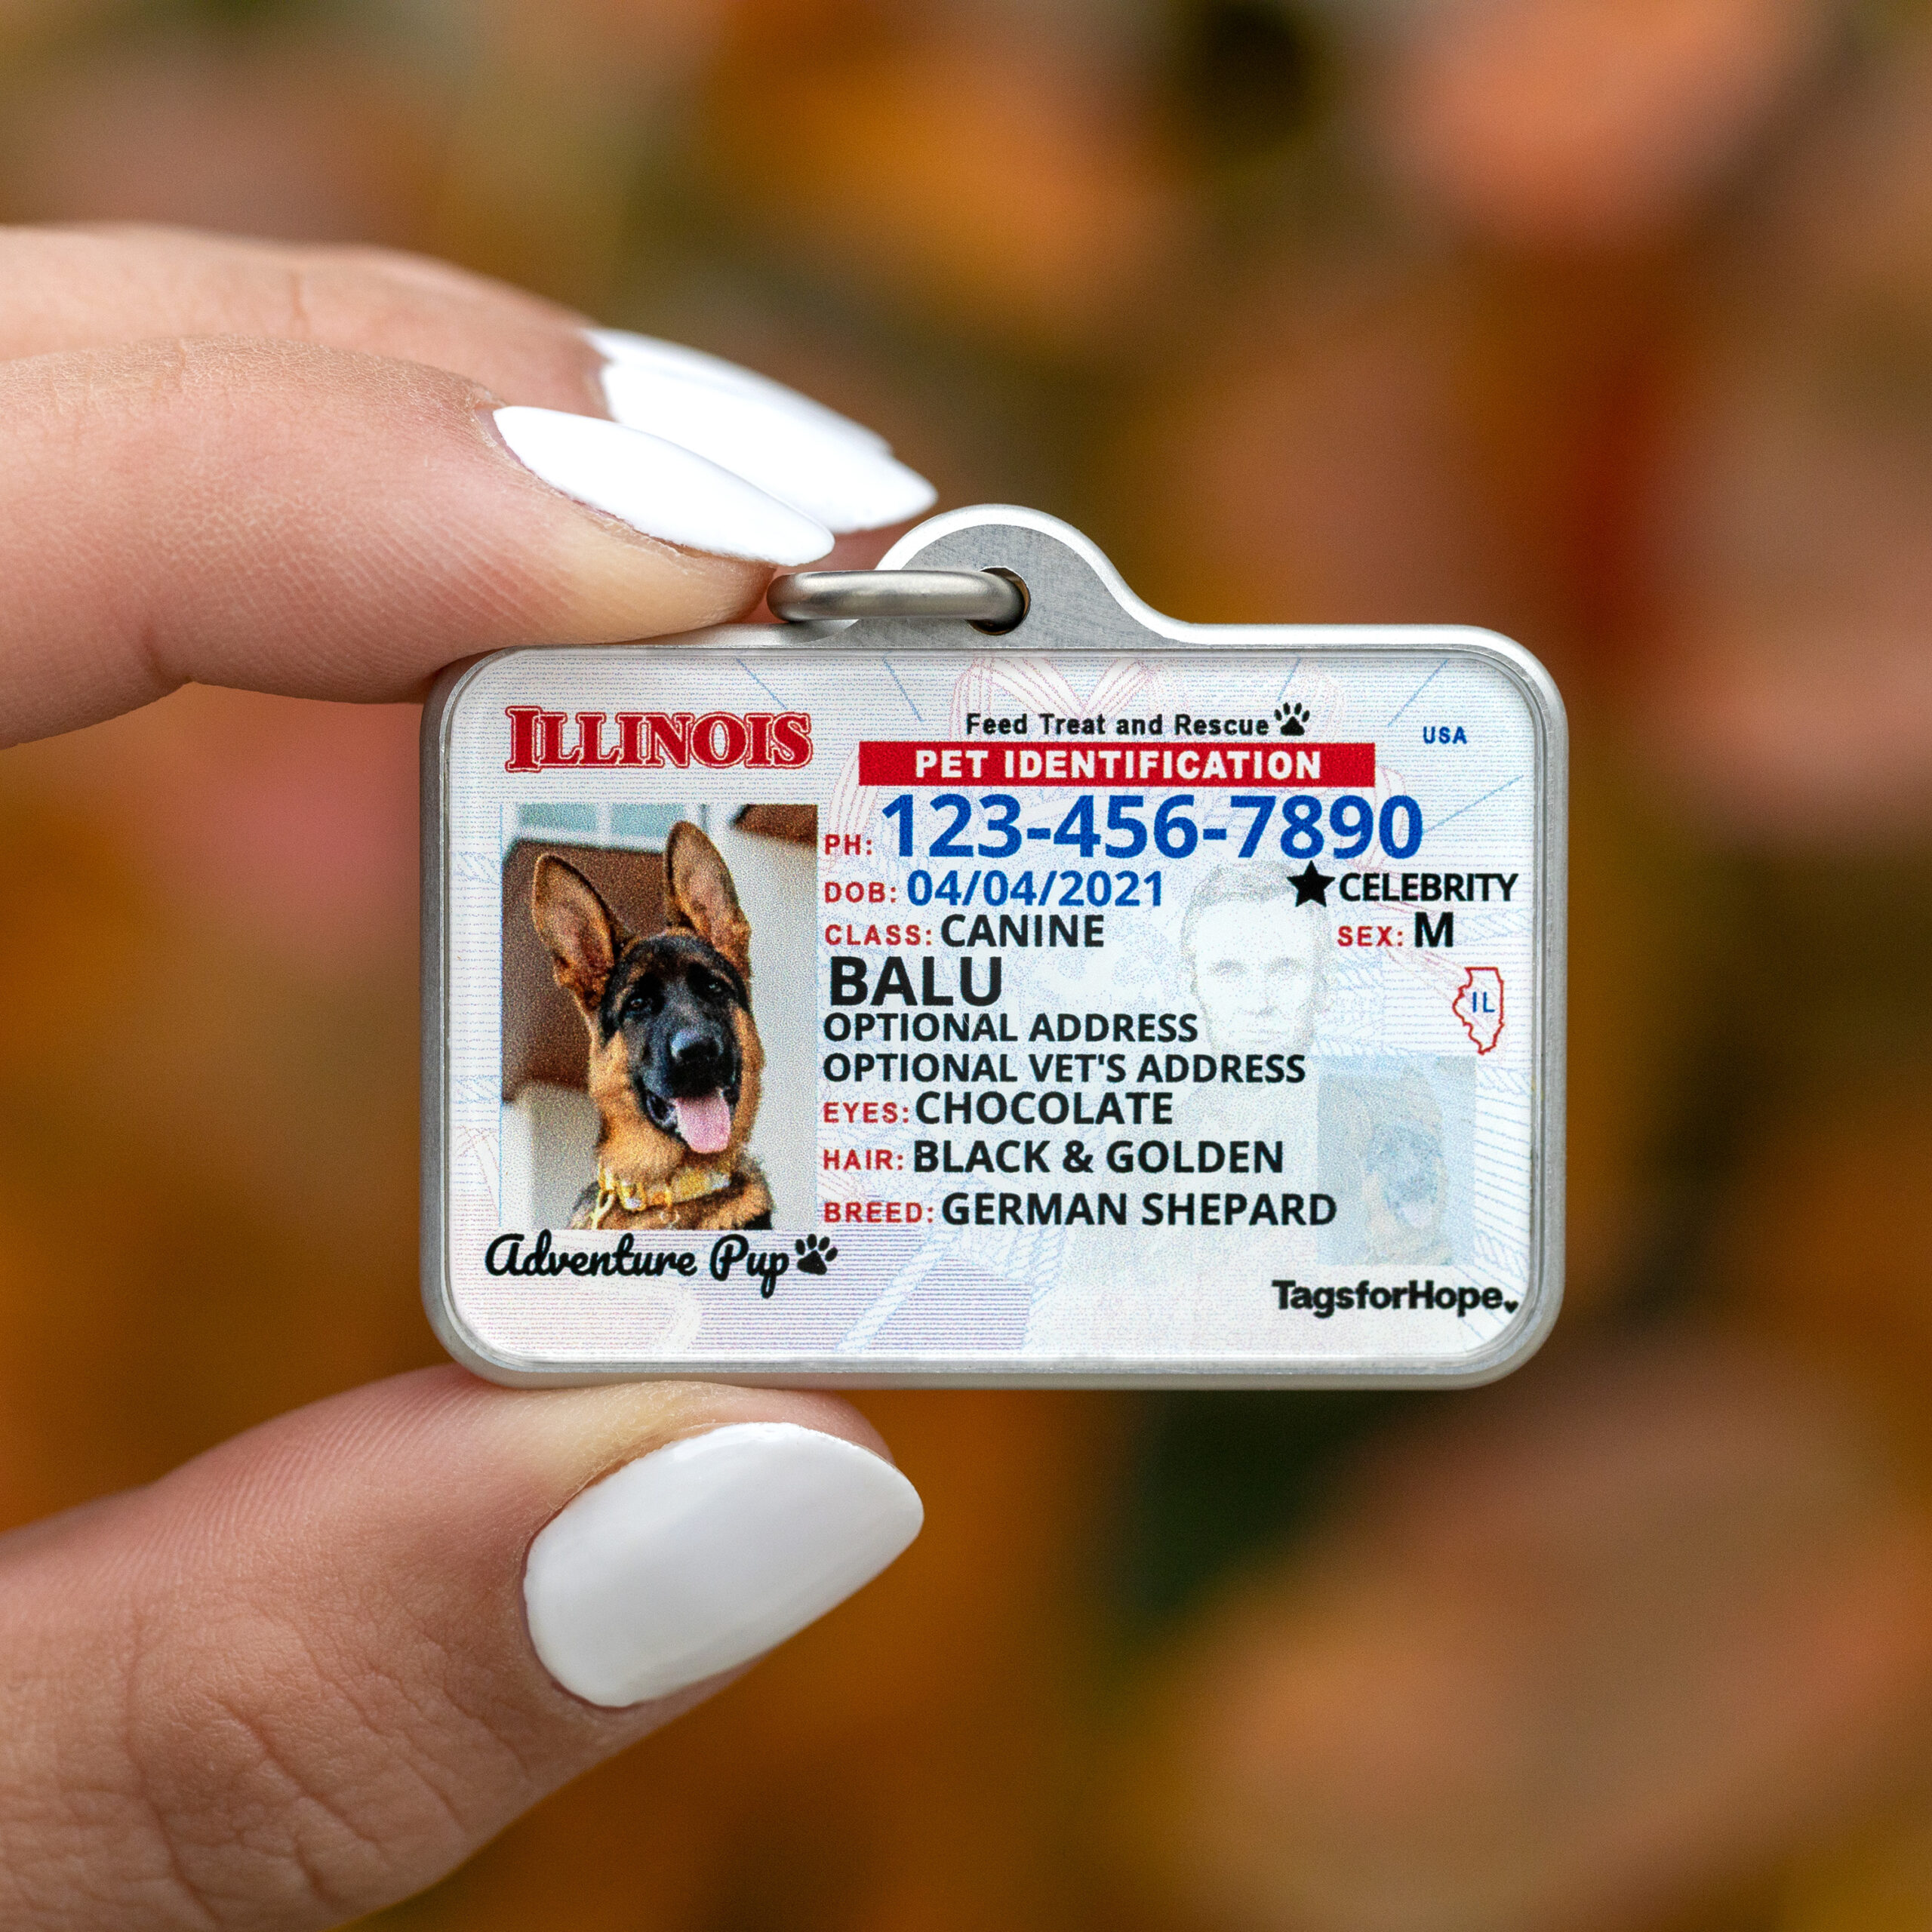 How to keep my dog's name tag and license from falling off the